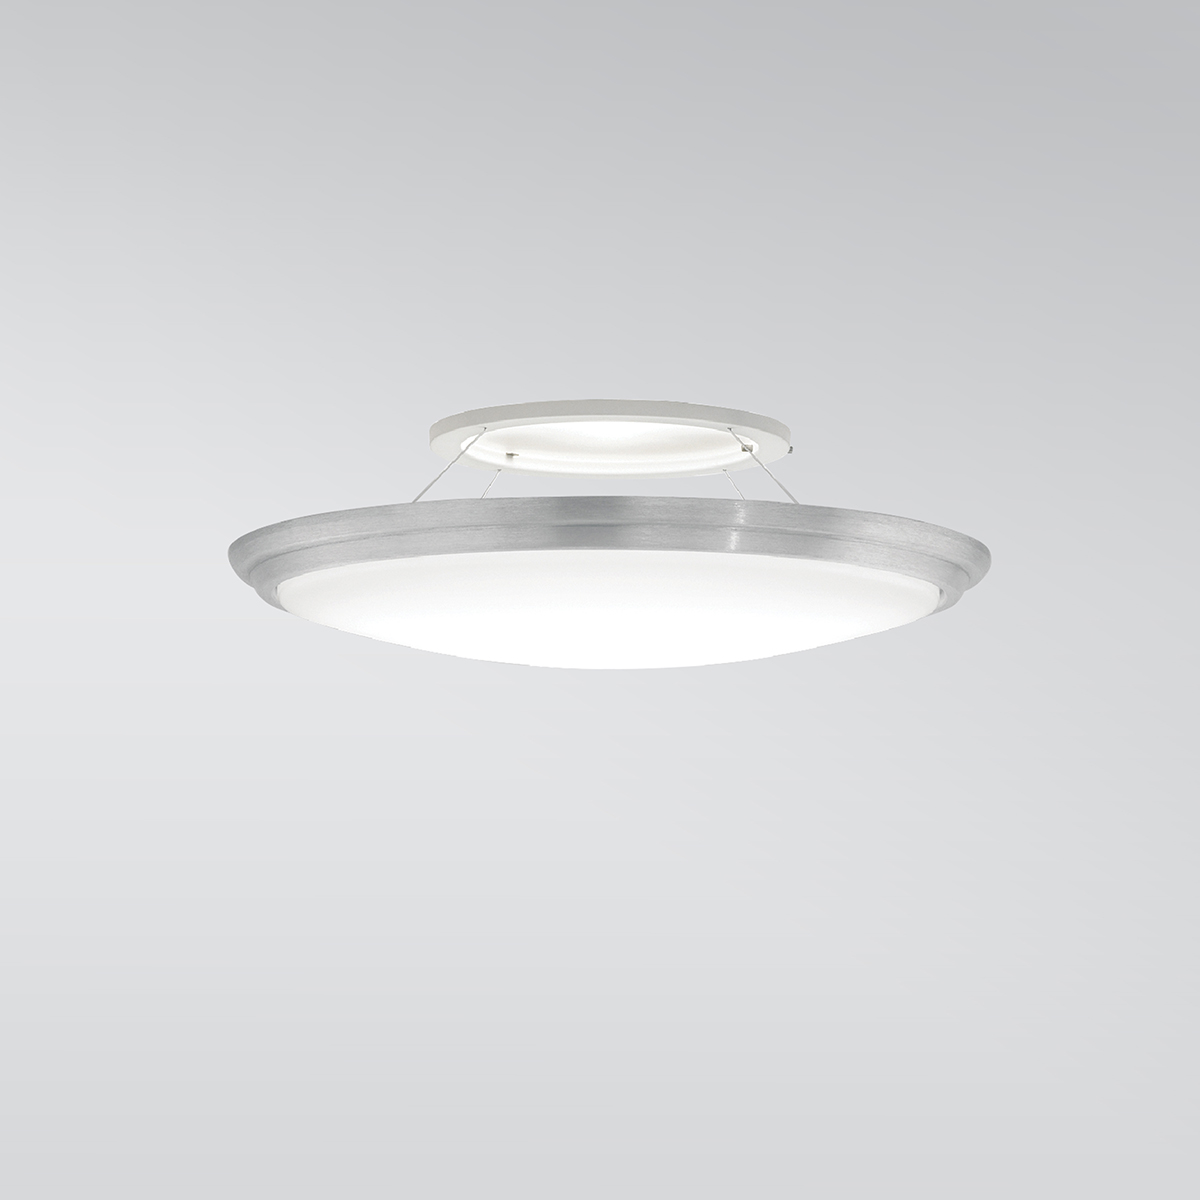 Ovation CM1676 Ceiling mount light fixture with the illusion of a pendant